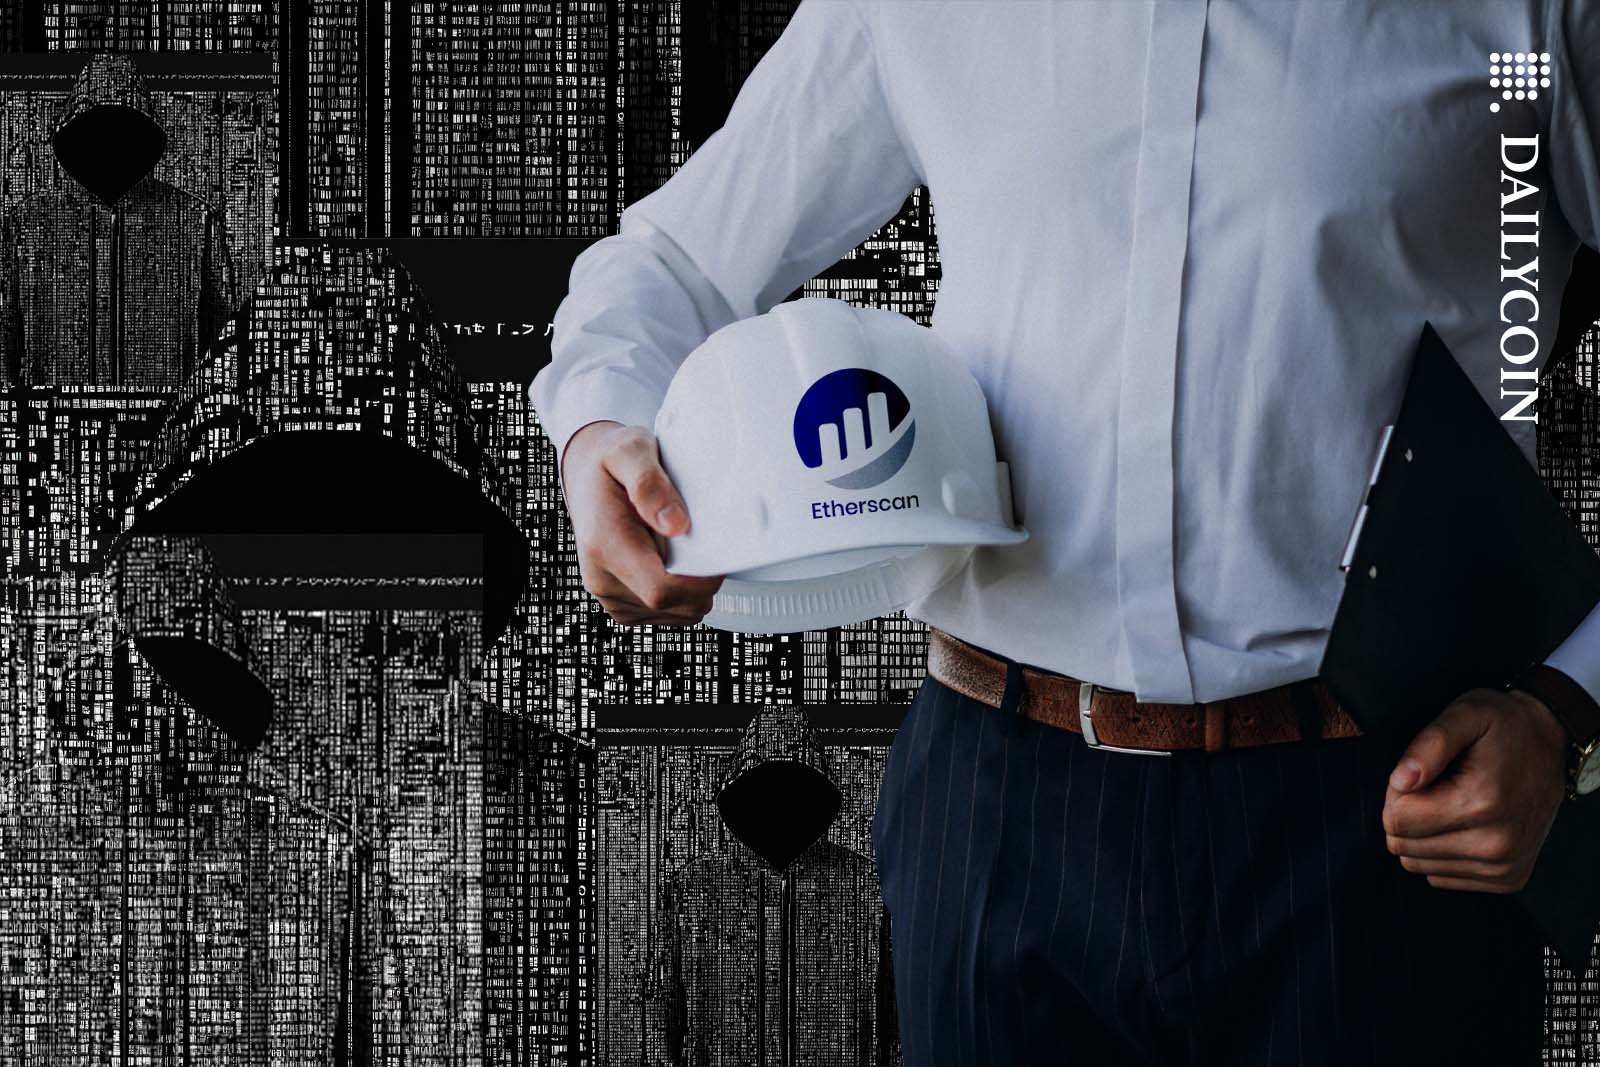 Health and safety officer holding a hard hat with a Etherscan logo on it.